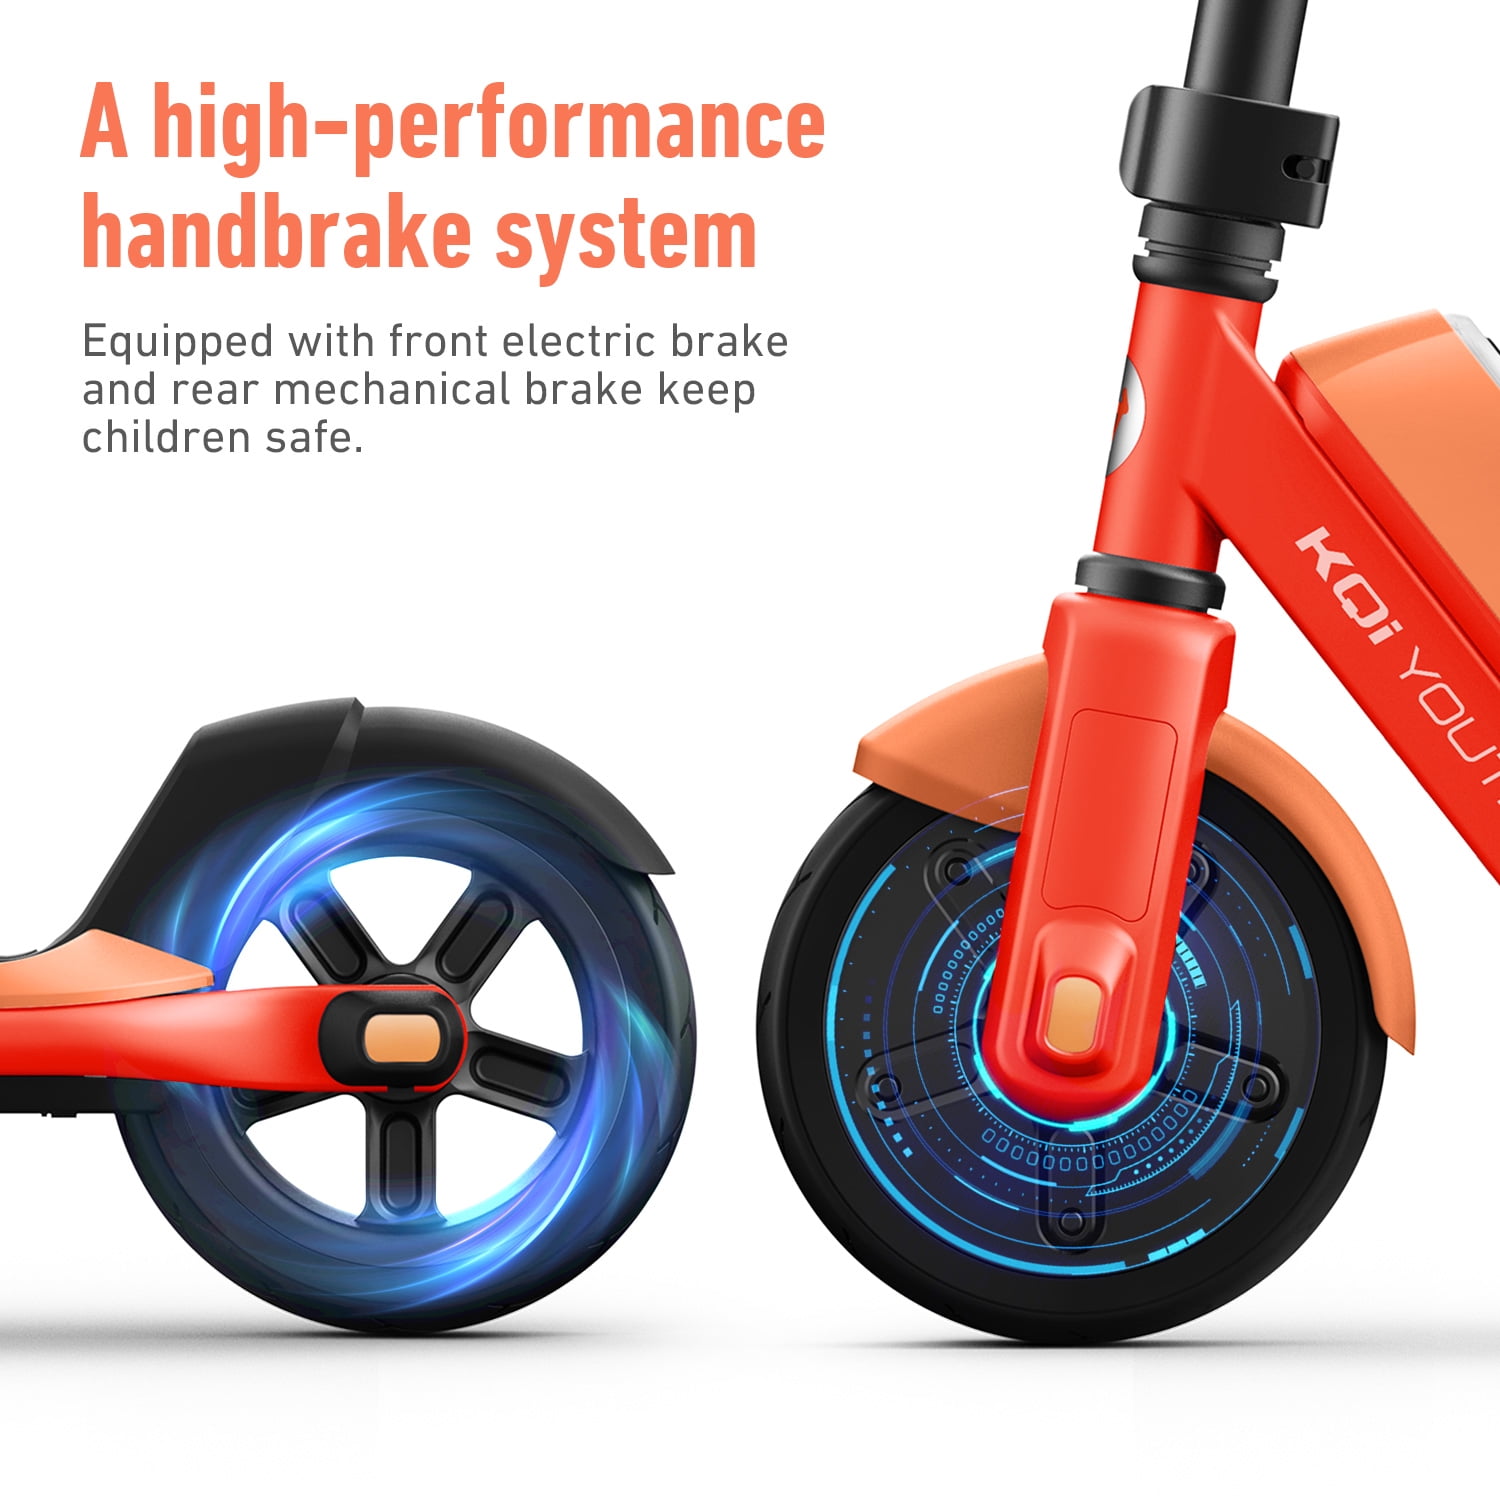 SCOOTER ELÉCTRICO NIU KQi Youth+ - Marca2 Mobility